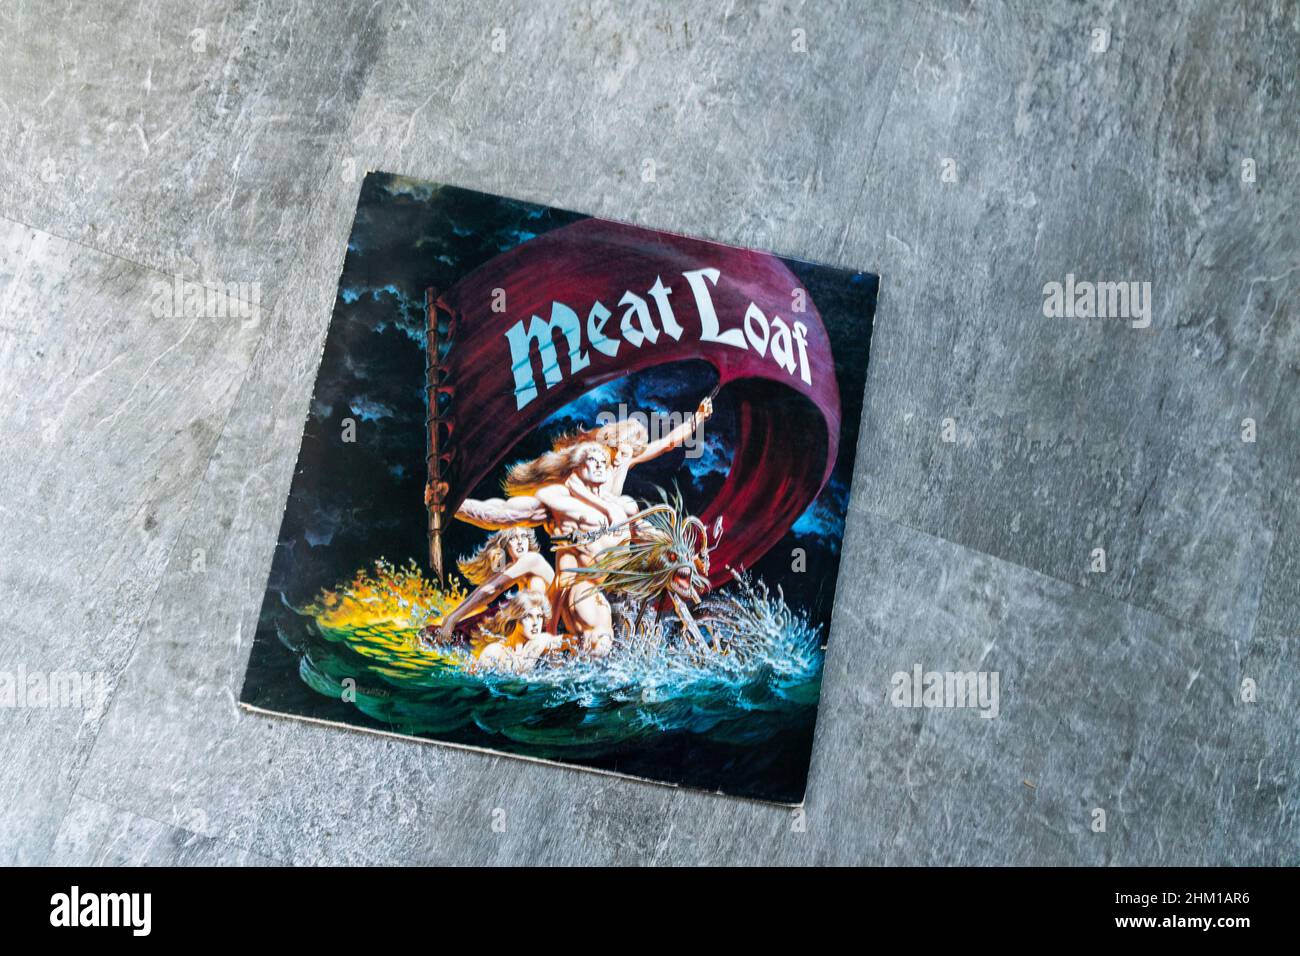 Hull, UK - 6 Feb 2022: Meatloaf Vinyl album cover. Meat loaf is a world famous American singer and actor known for hits such as Bat Out Of Hell. Vinyl Stock Photo